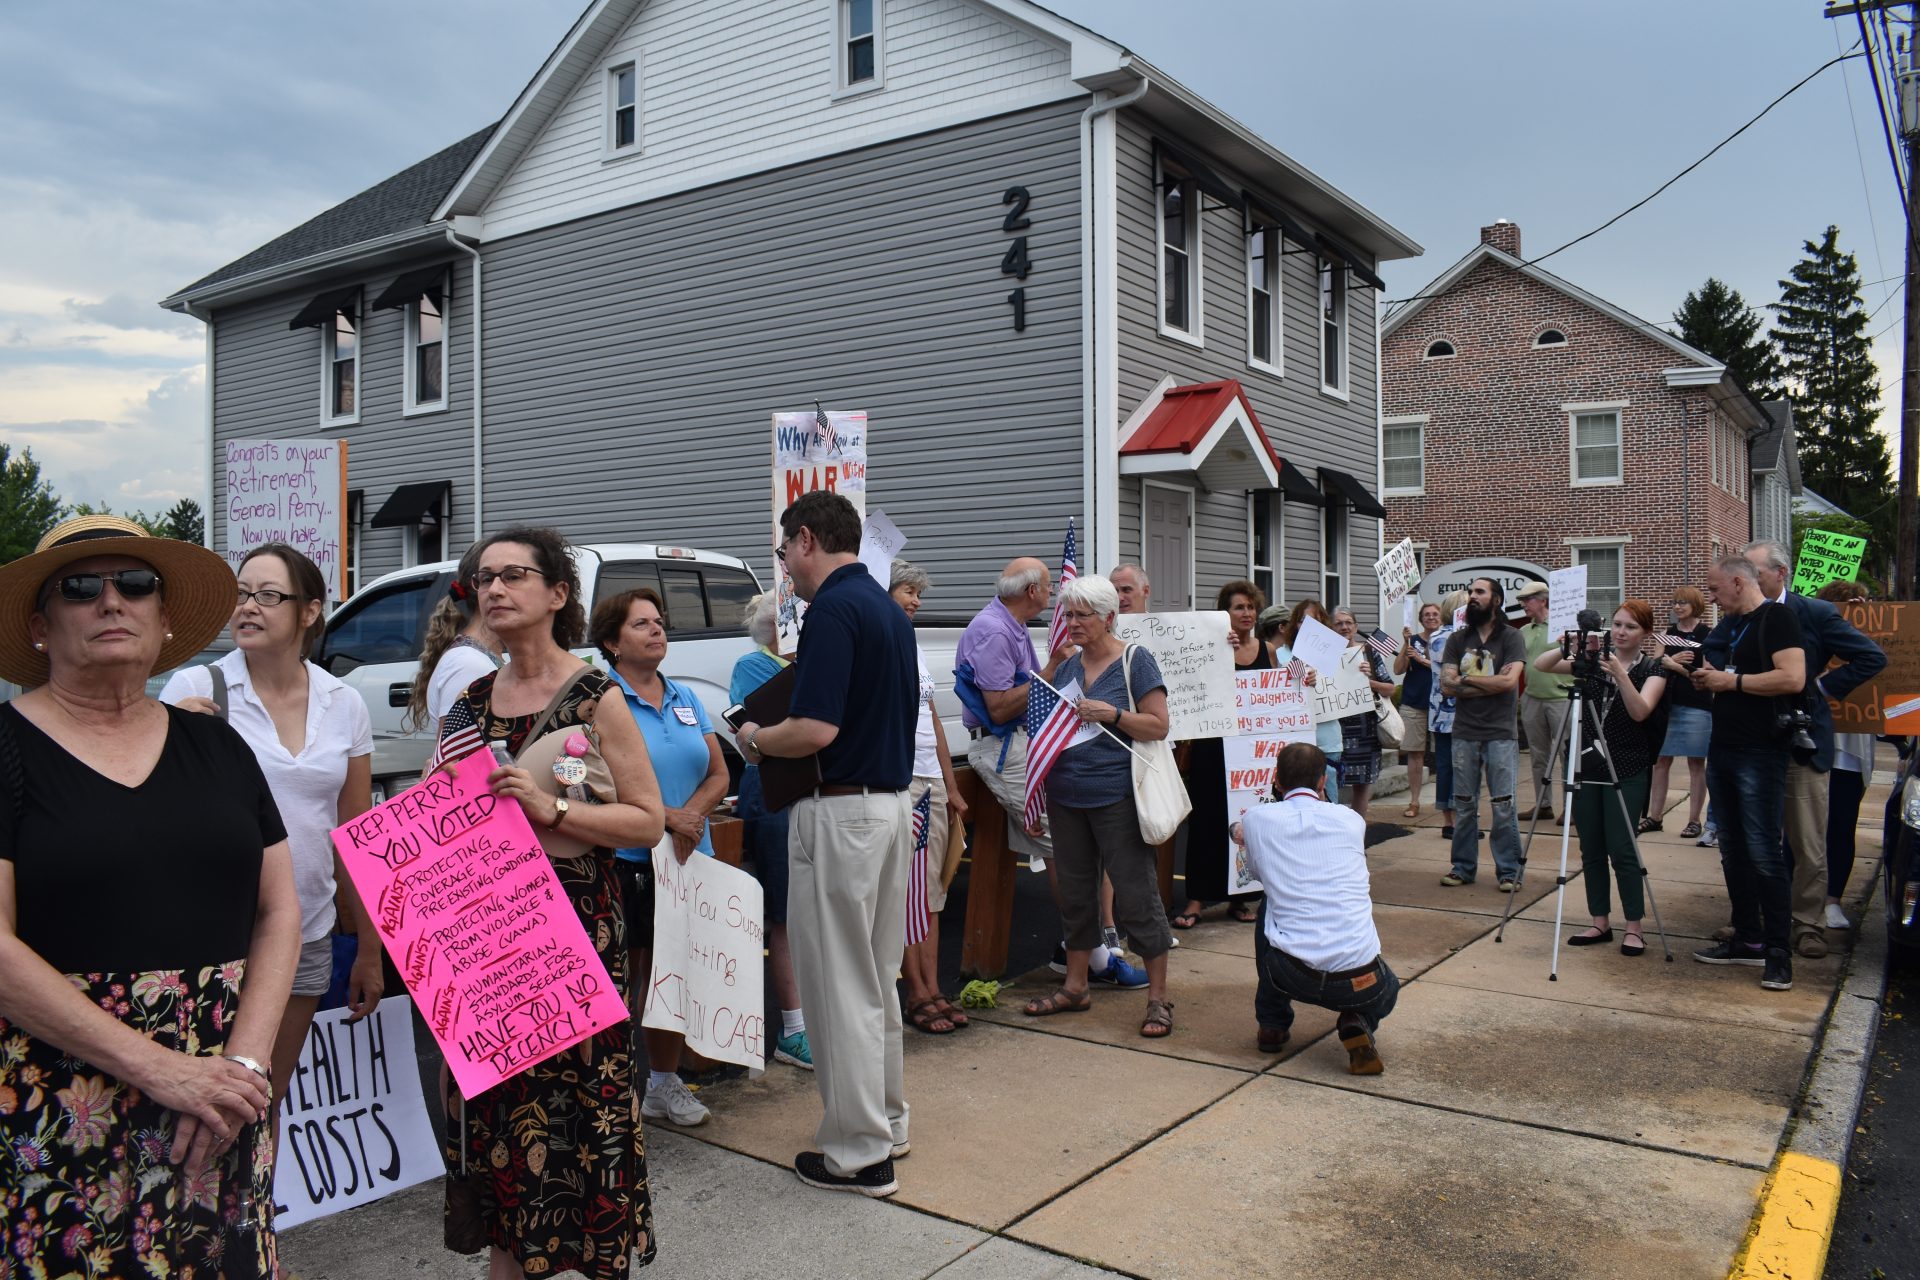 Protesters gathered outside the Hummelstown Fire Department on July 30, 2019, ahead of a town hall hosted by Republican Congressman Scott Perry of Pennsylvania.